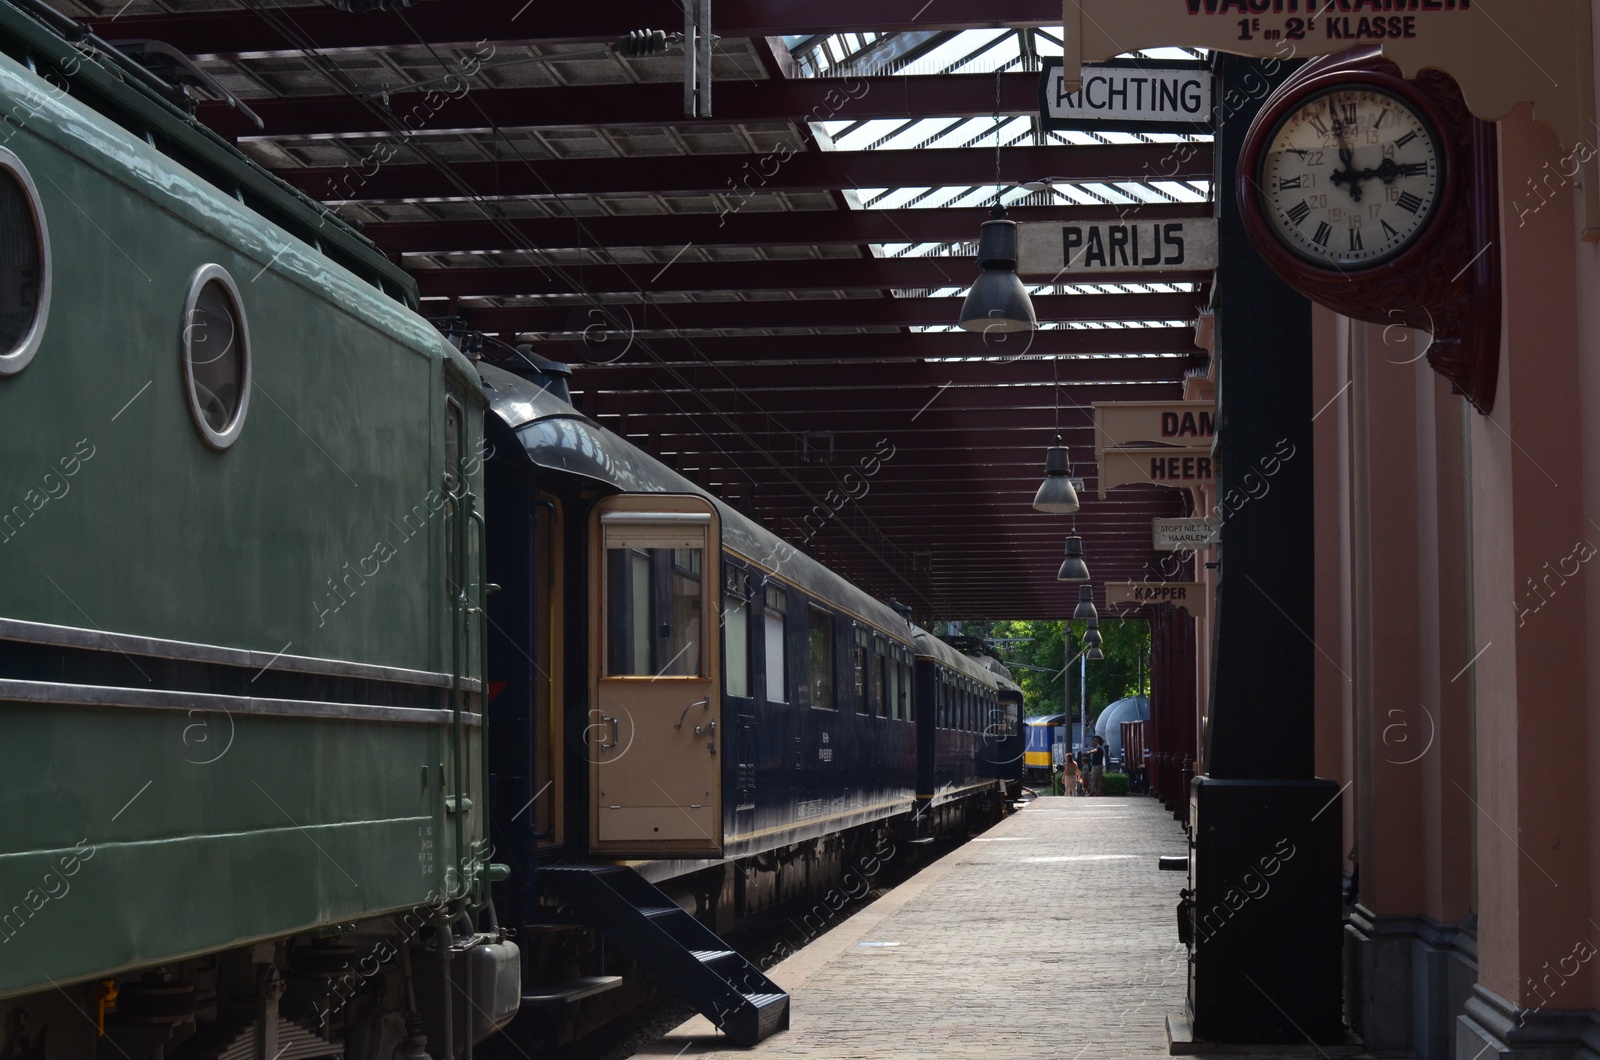 Photo of Utrecht, Netherlands - July 23, 2022: Railway station with wagons on display in Spoorwegmuseum